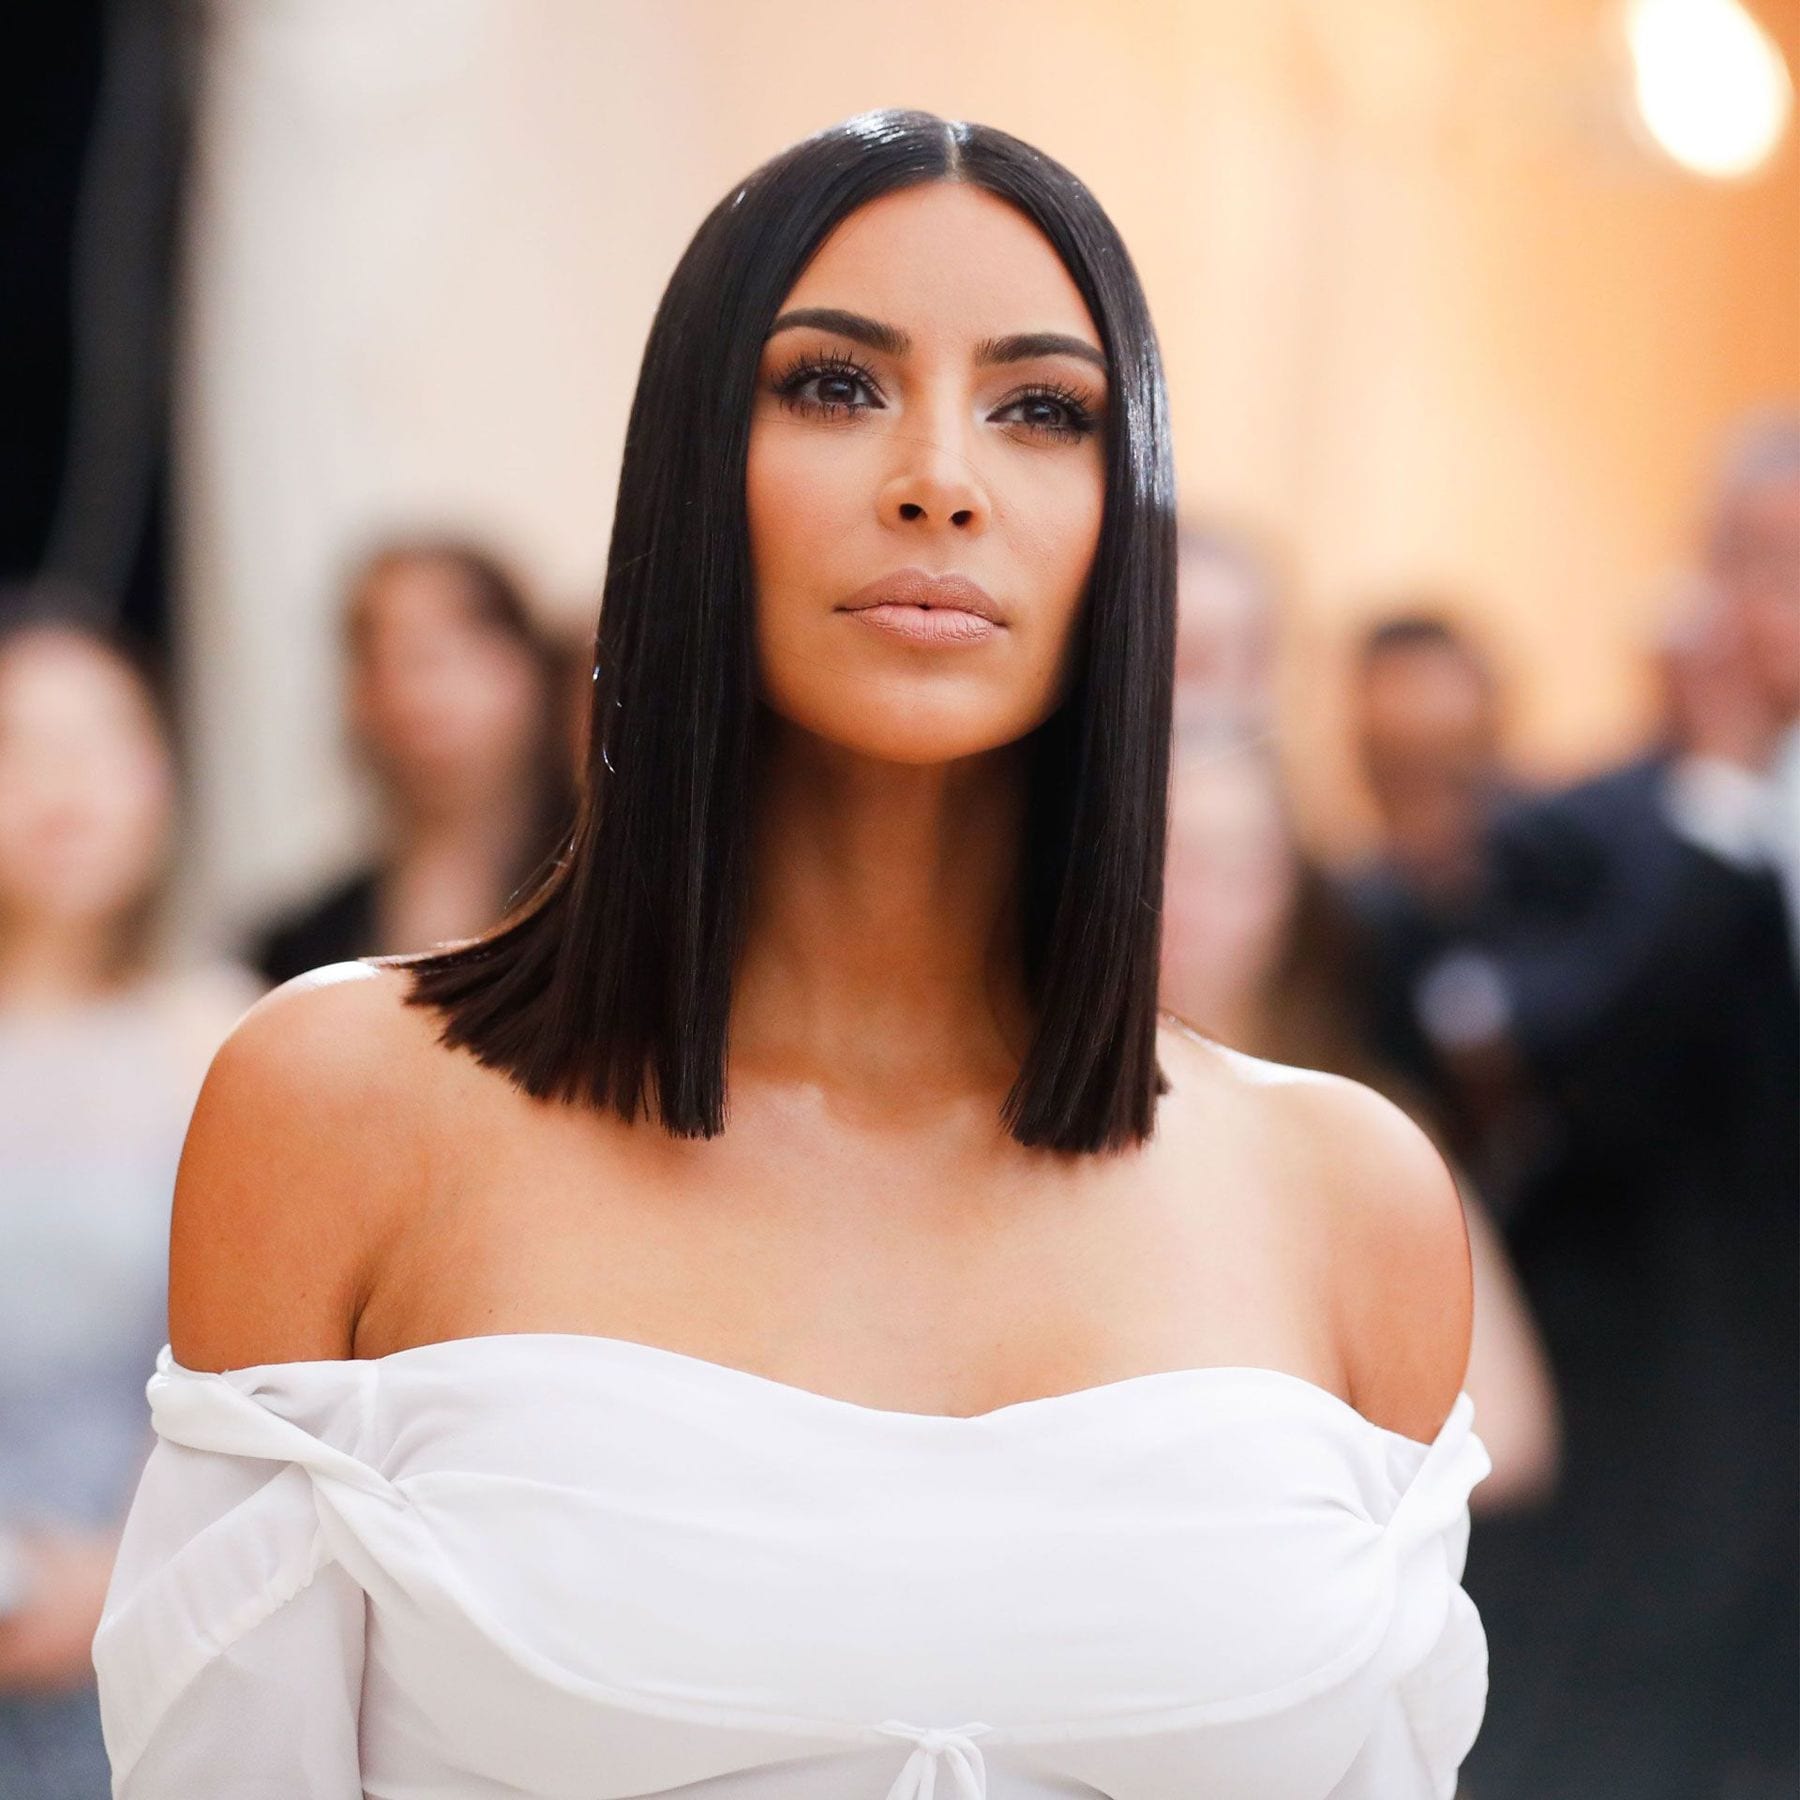 Kim Kardashian auctions off 200 items from her closet for charity including designer baby shoes, Kanye tour shirts and bikini bottoms